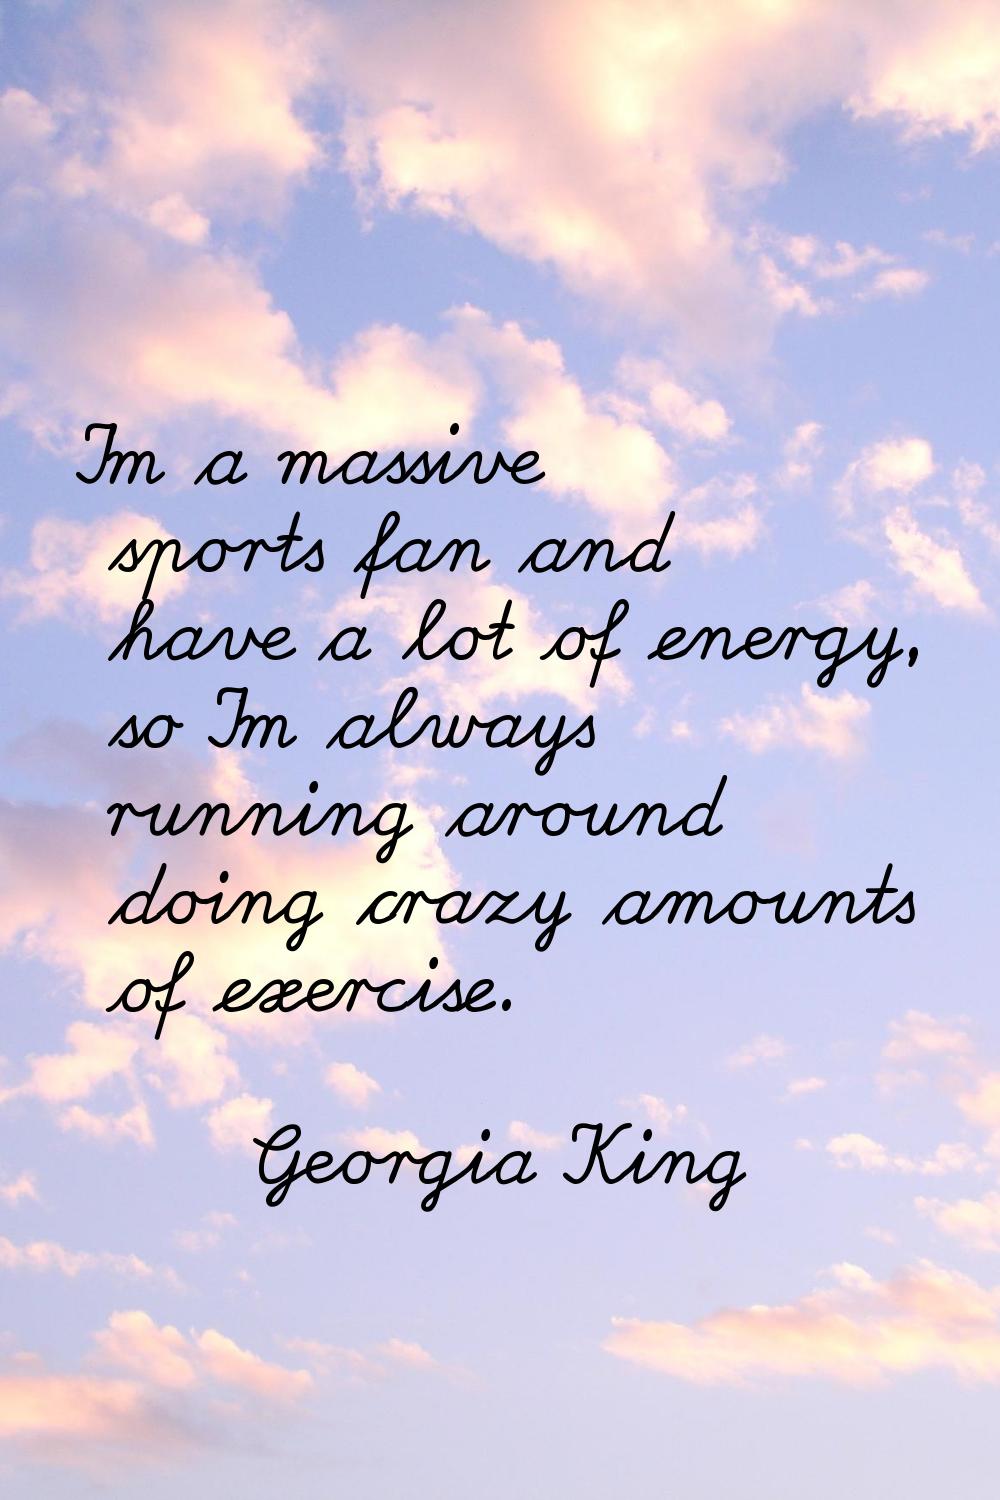 I'm a massive sports fan and have a lot of energy, so I'm always running around doing crazy amounts